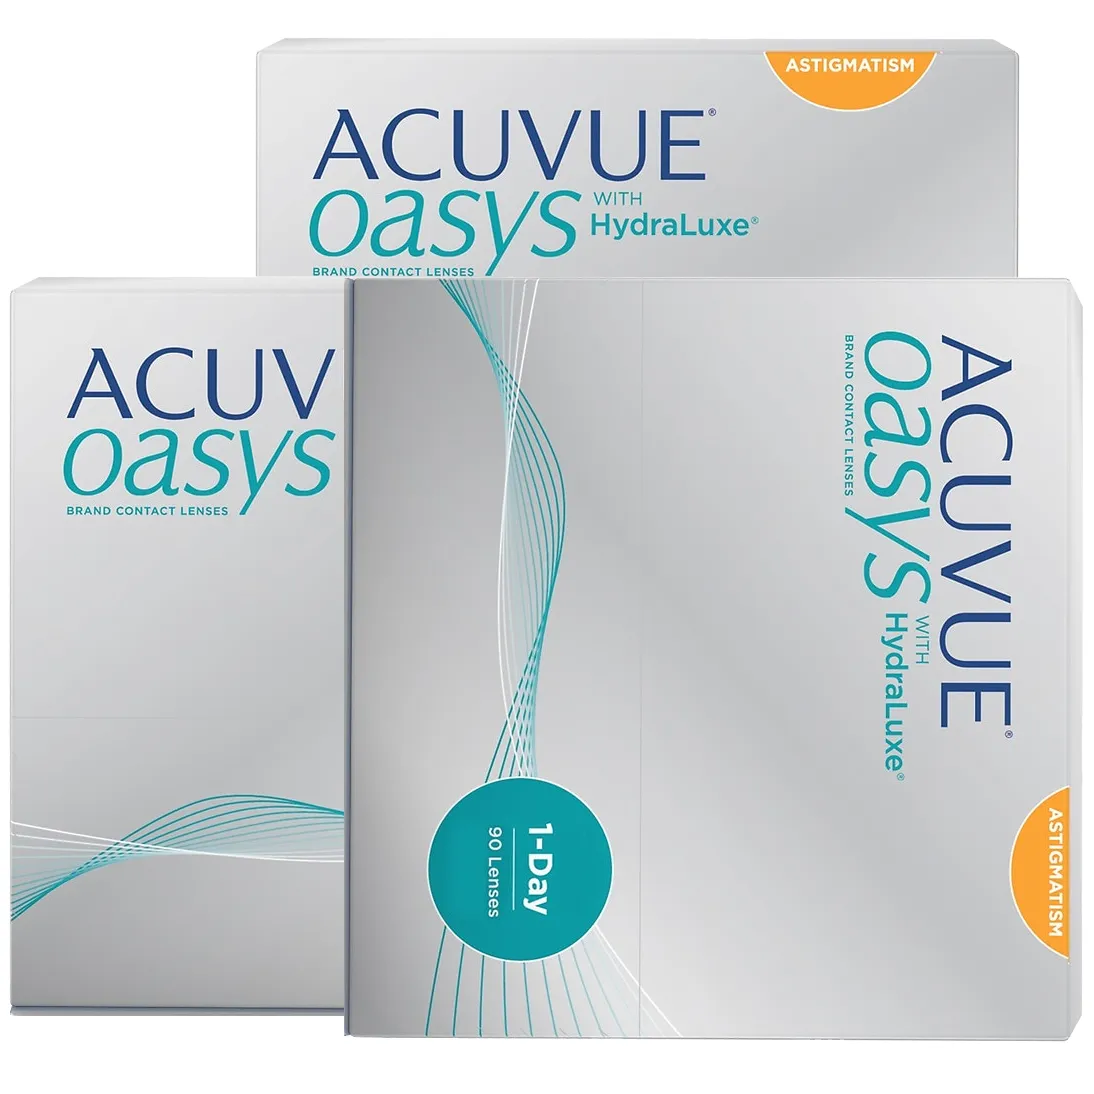 Free ACUVUE contact lens trial